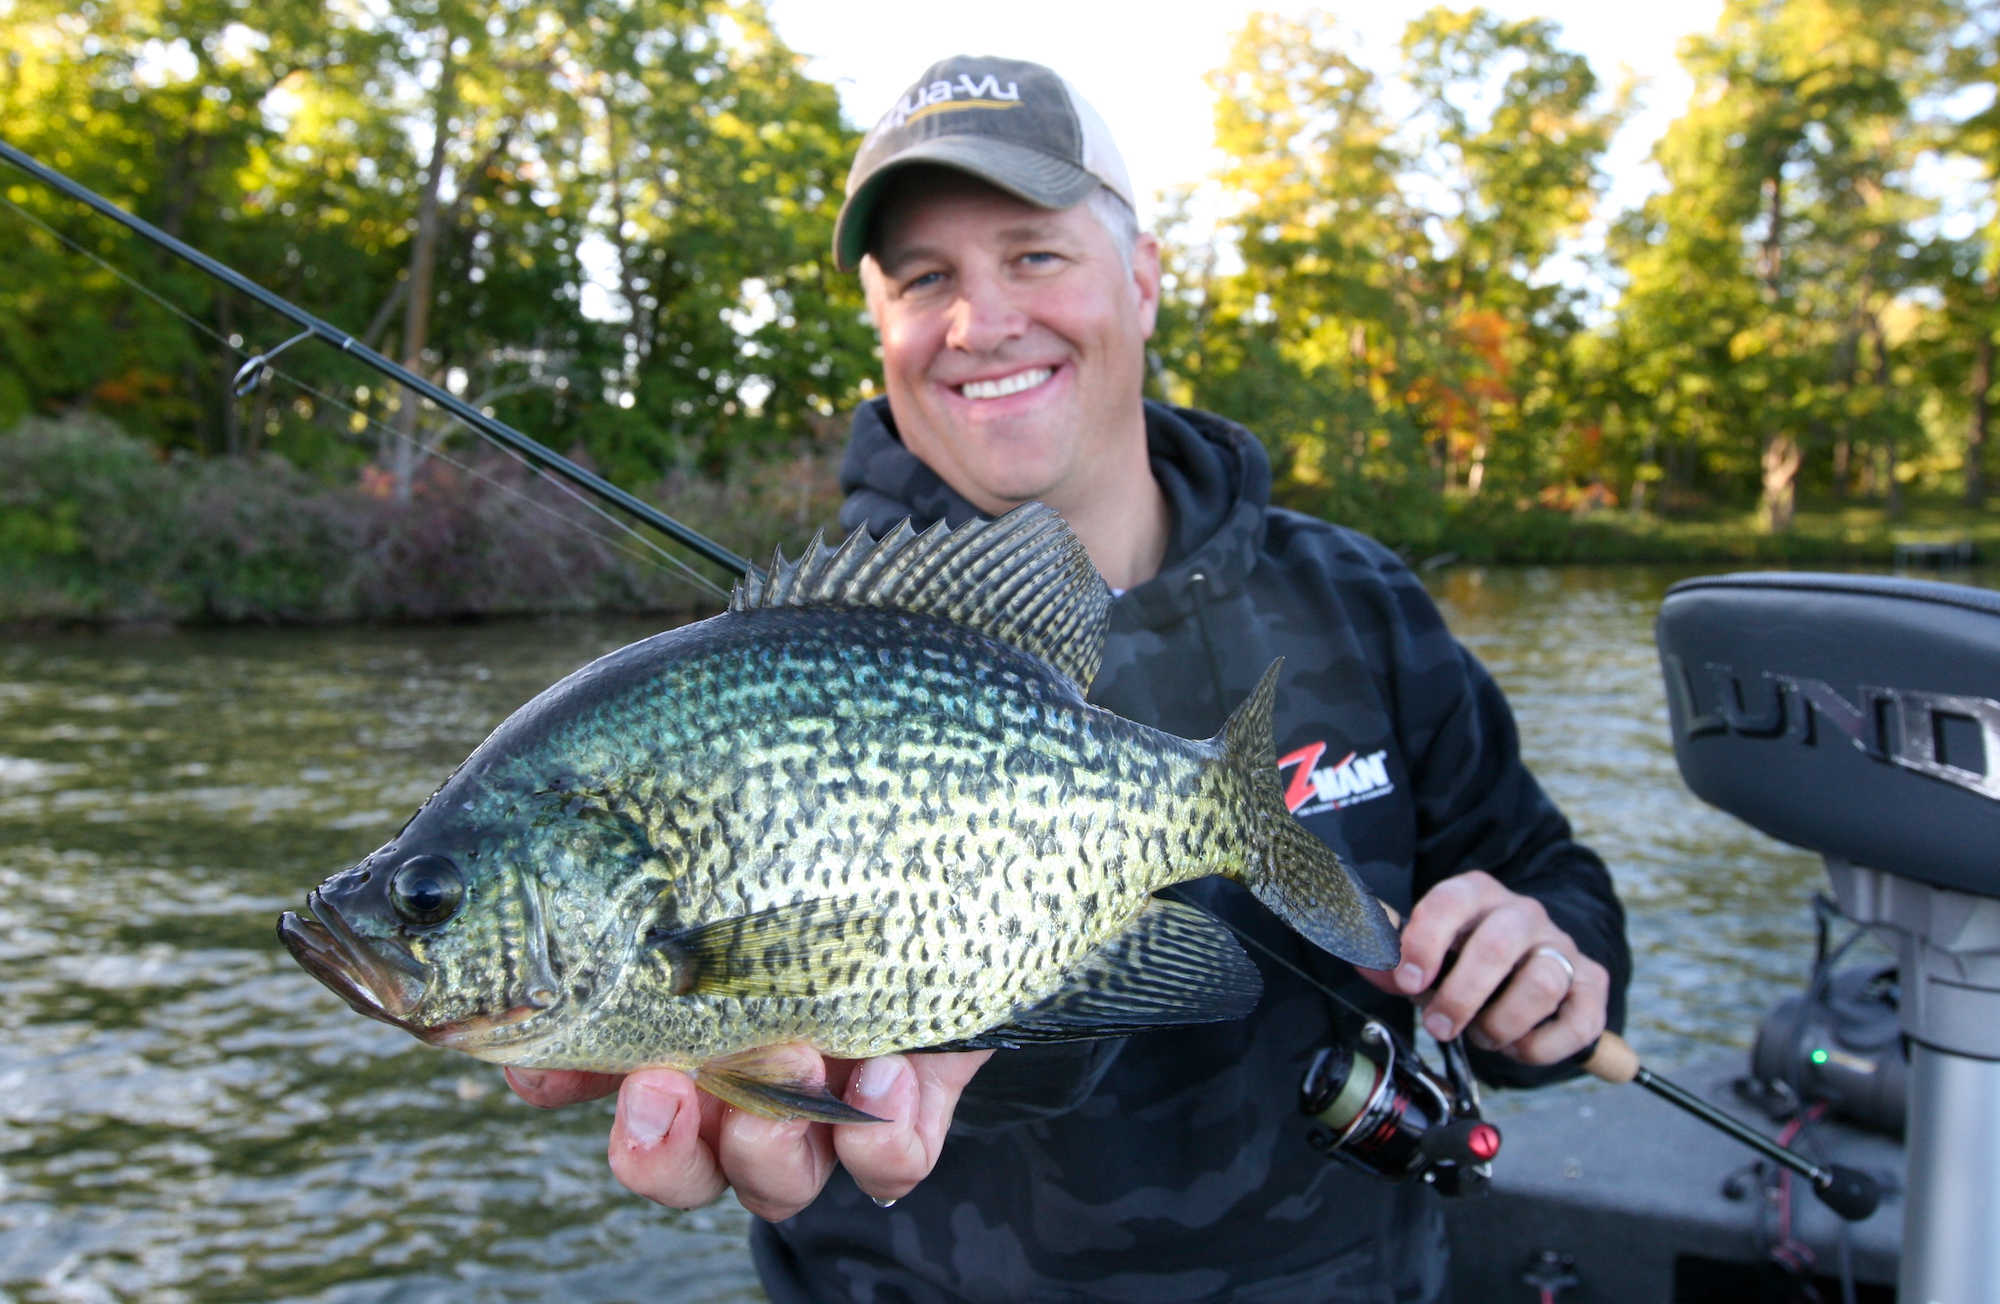 Here are some selections of the best crappie lure, jig and bait. Trying to  choose the best crappie lures, j…